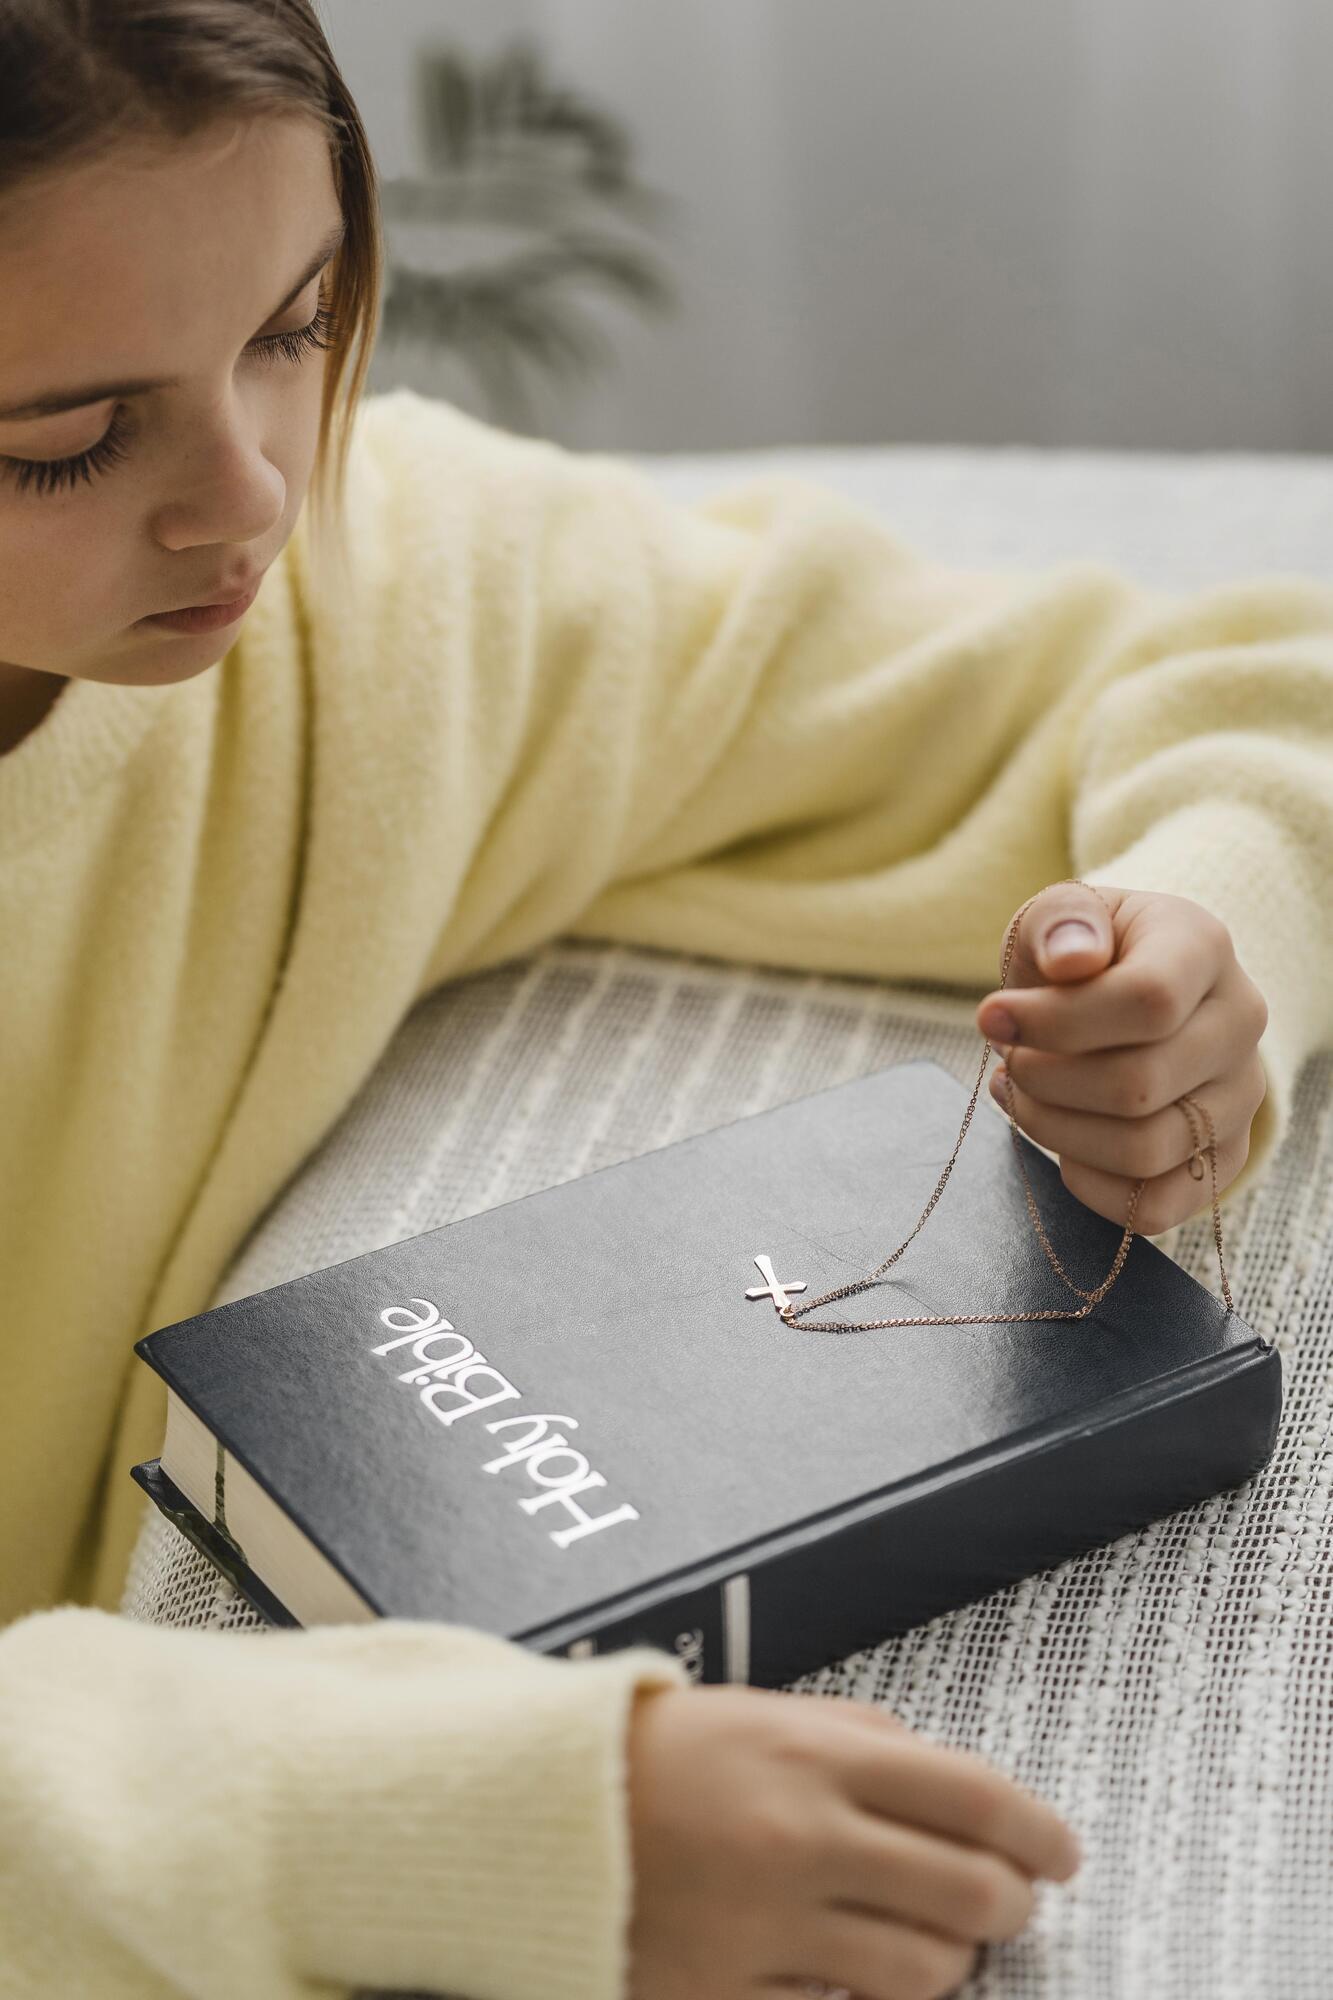 Bibles in hotels: the mysteries of placing the gospel in hotels and current changes related to this topic